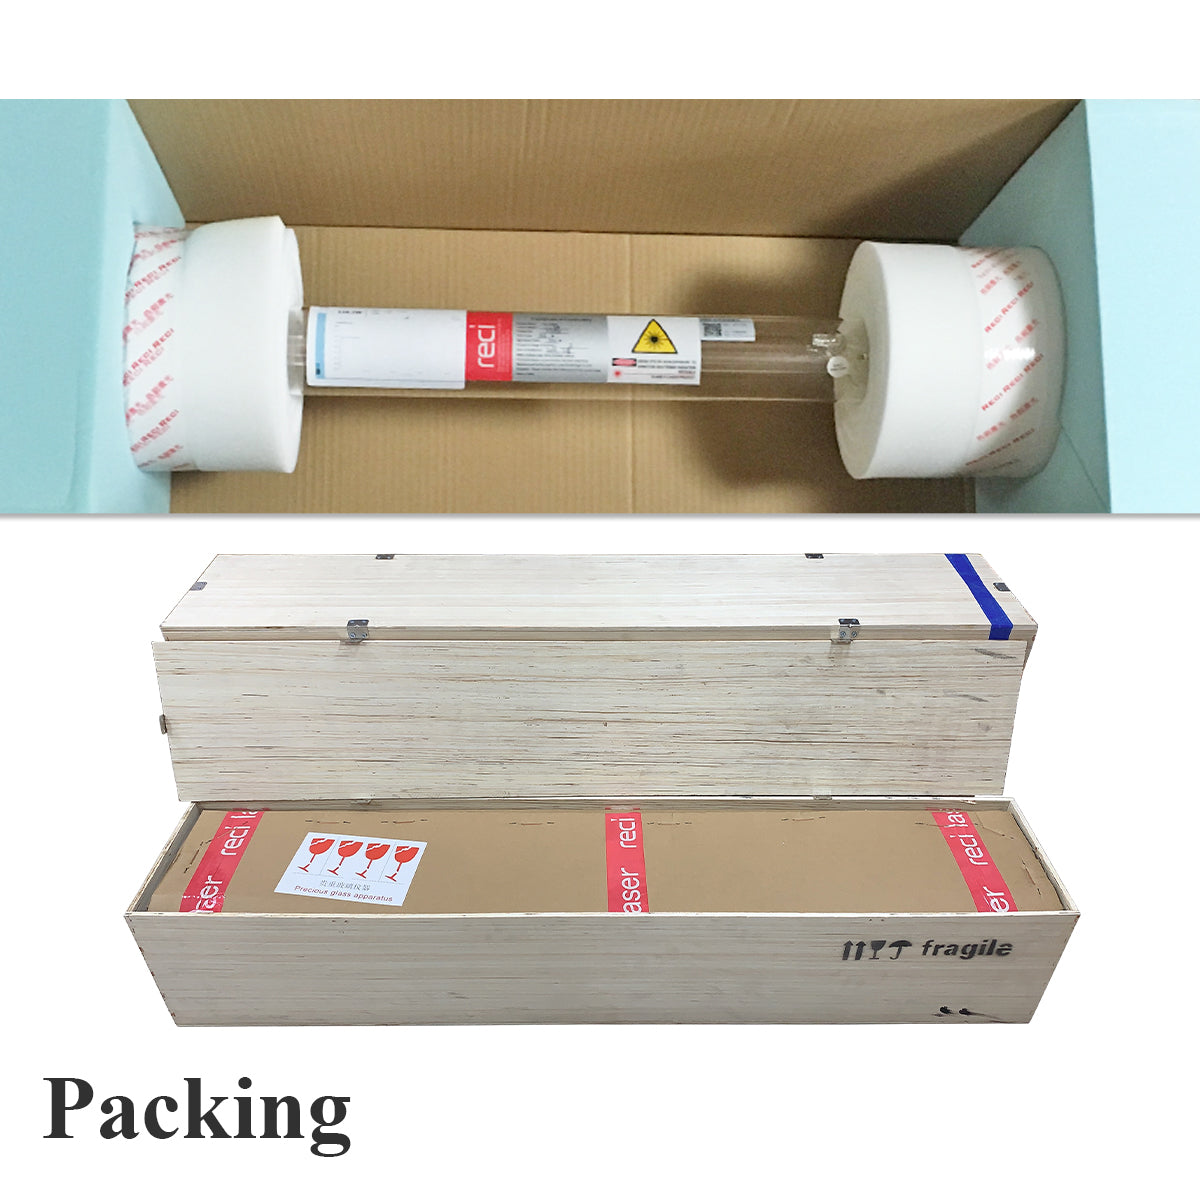 New T4 W4 CO2 Laser Tube T4 Reci 130W 120W D65mm Wooden Box Packing For 100W CO2 Laser Engraving Cuting Machine Lamp Spare Parts